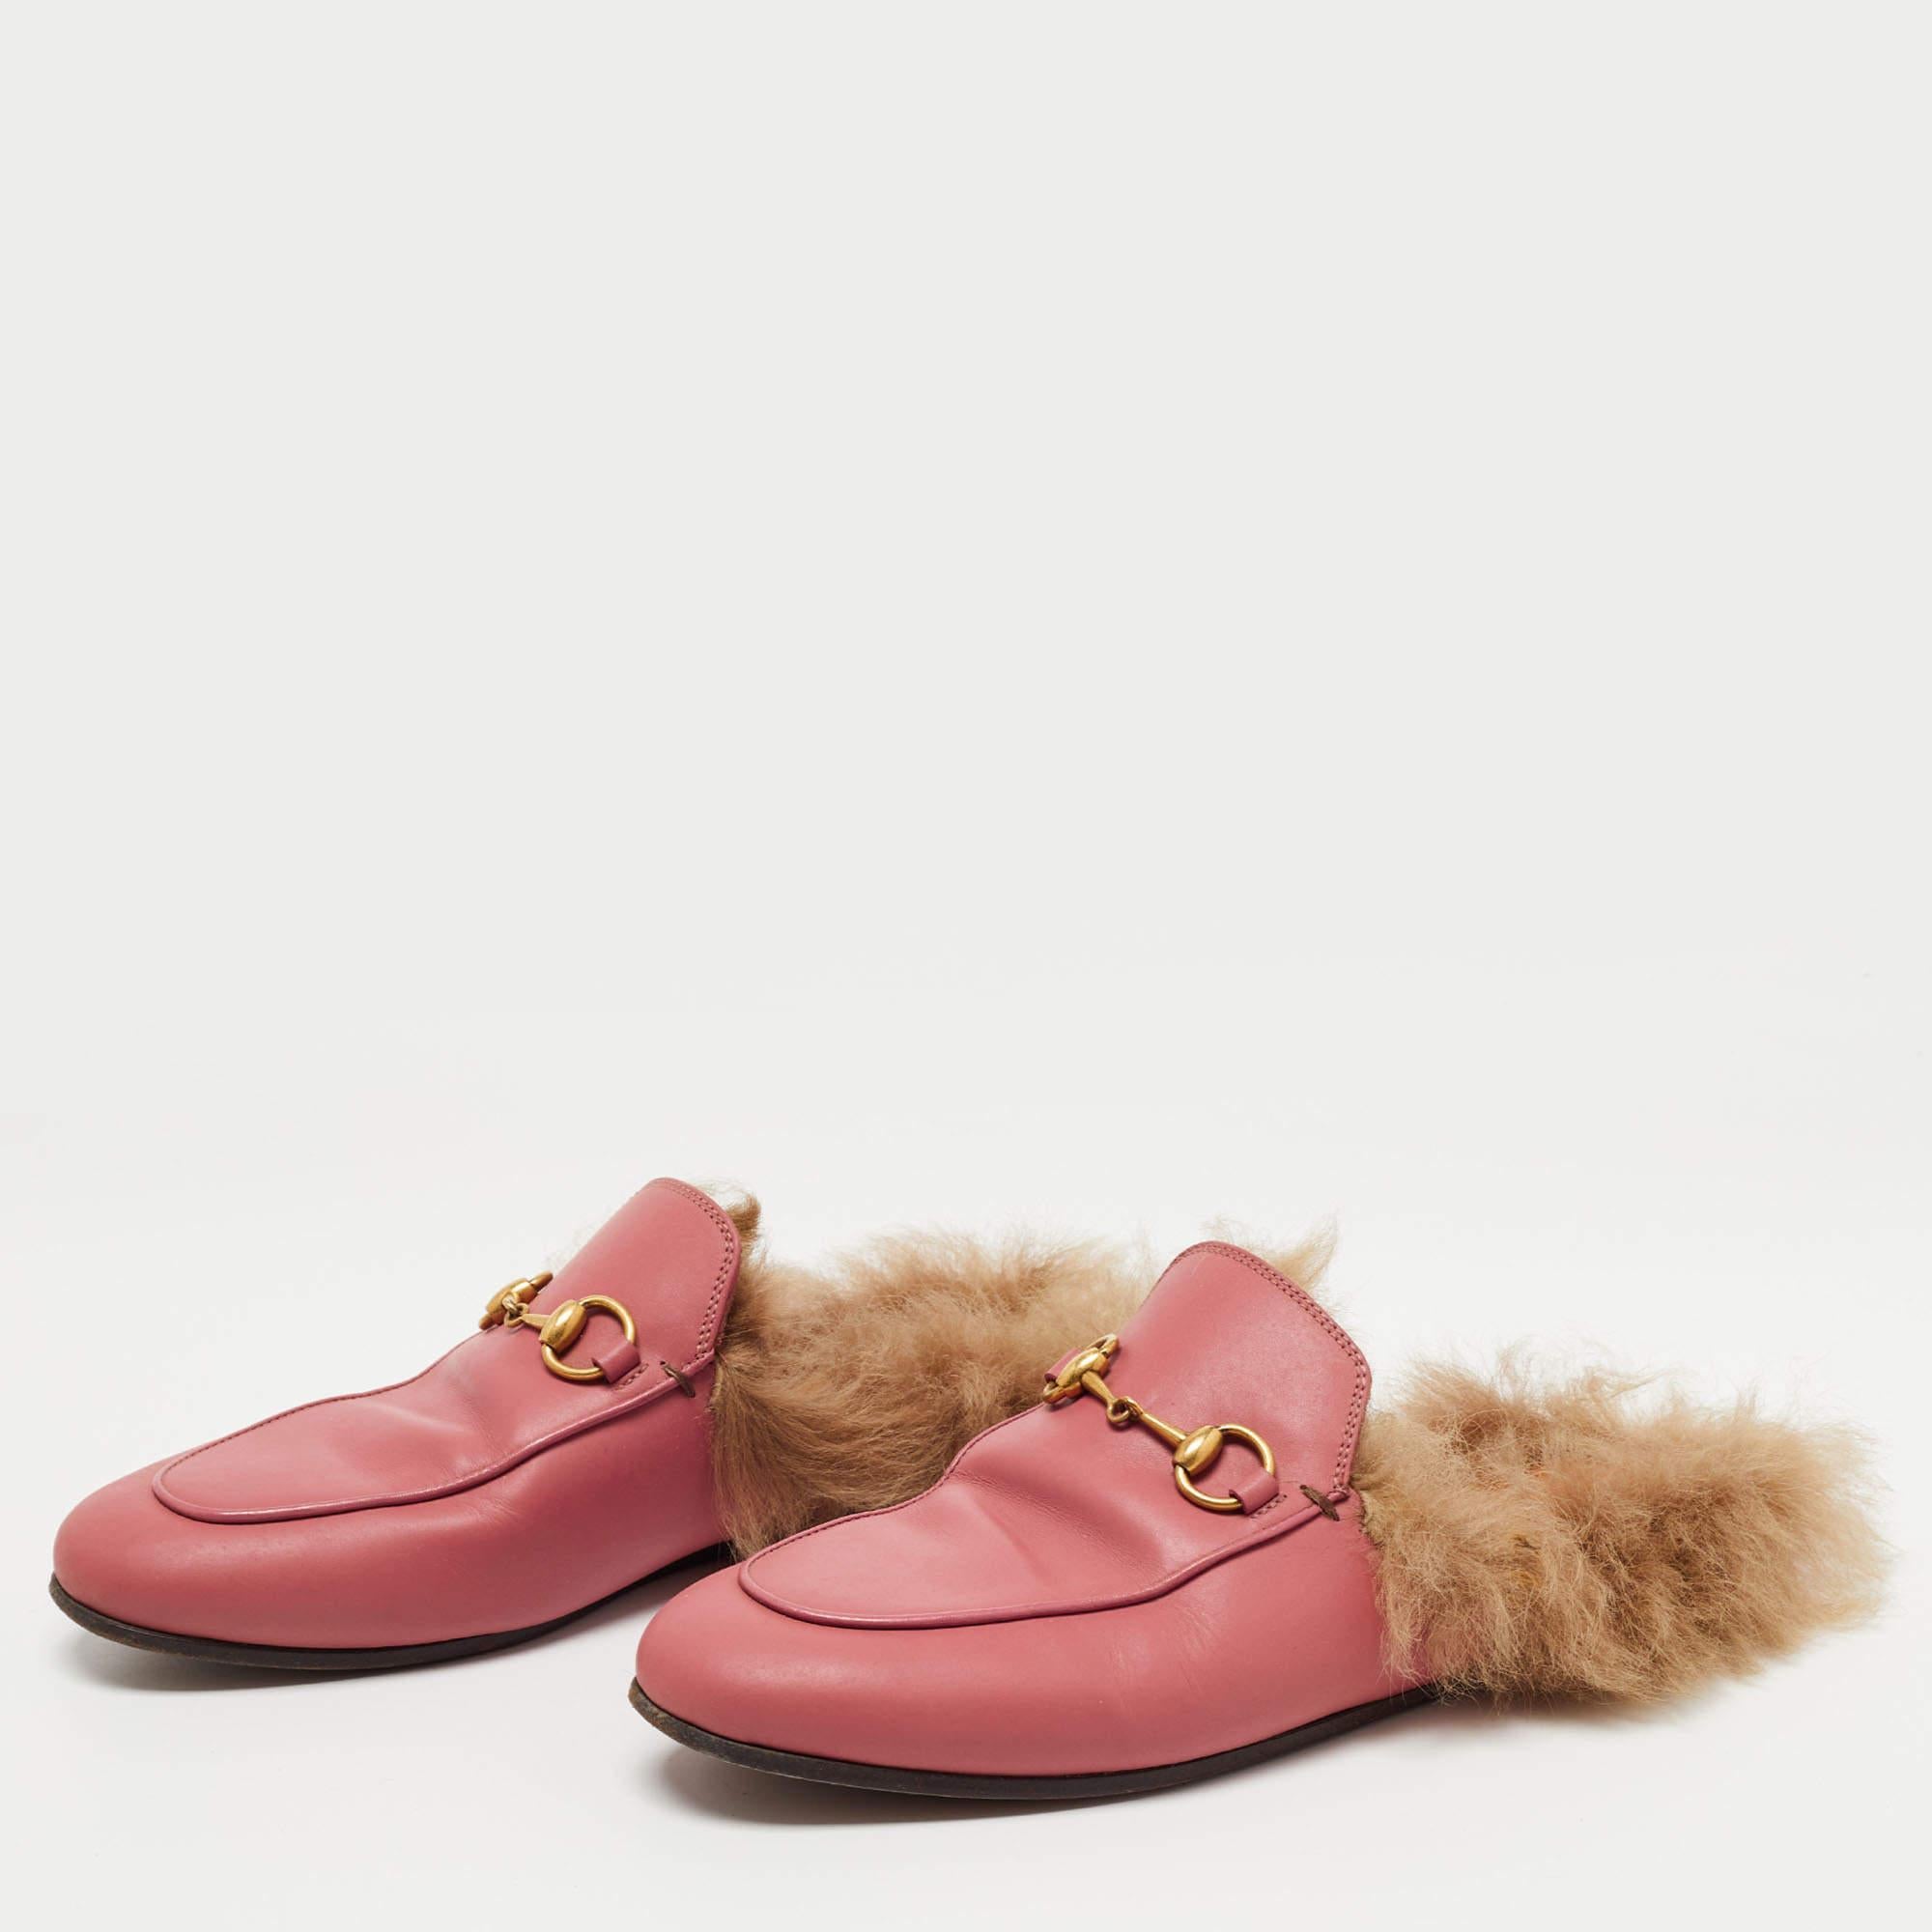 Gucci Prink Leather and Fur Princetown Mules Size 36 1